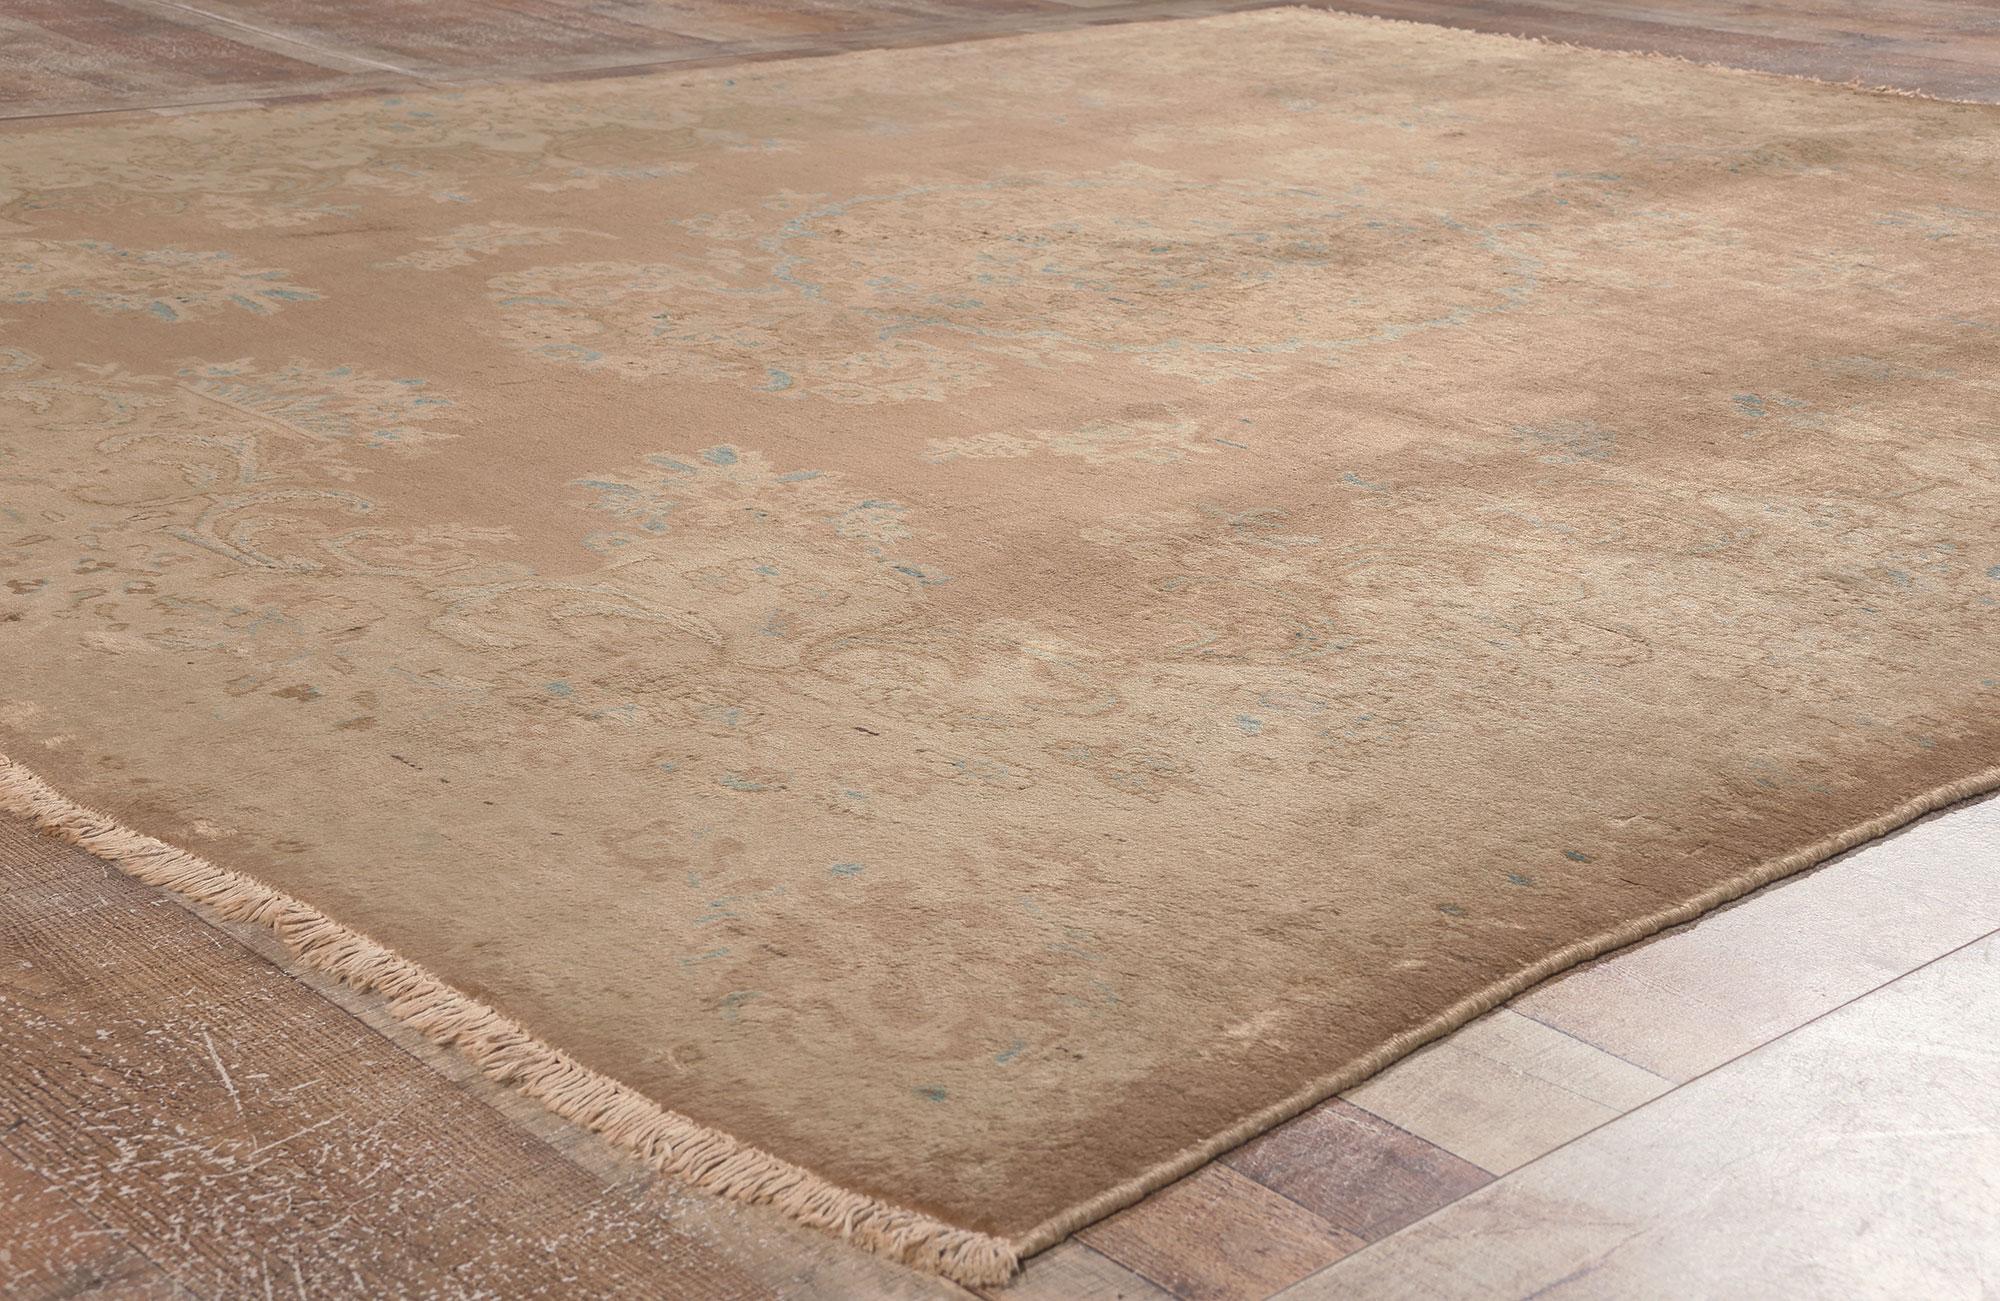 Wool Vintage Persian Sarouk Rug, Earth-Tone Elegance Meets Soft and Subtle For Sale